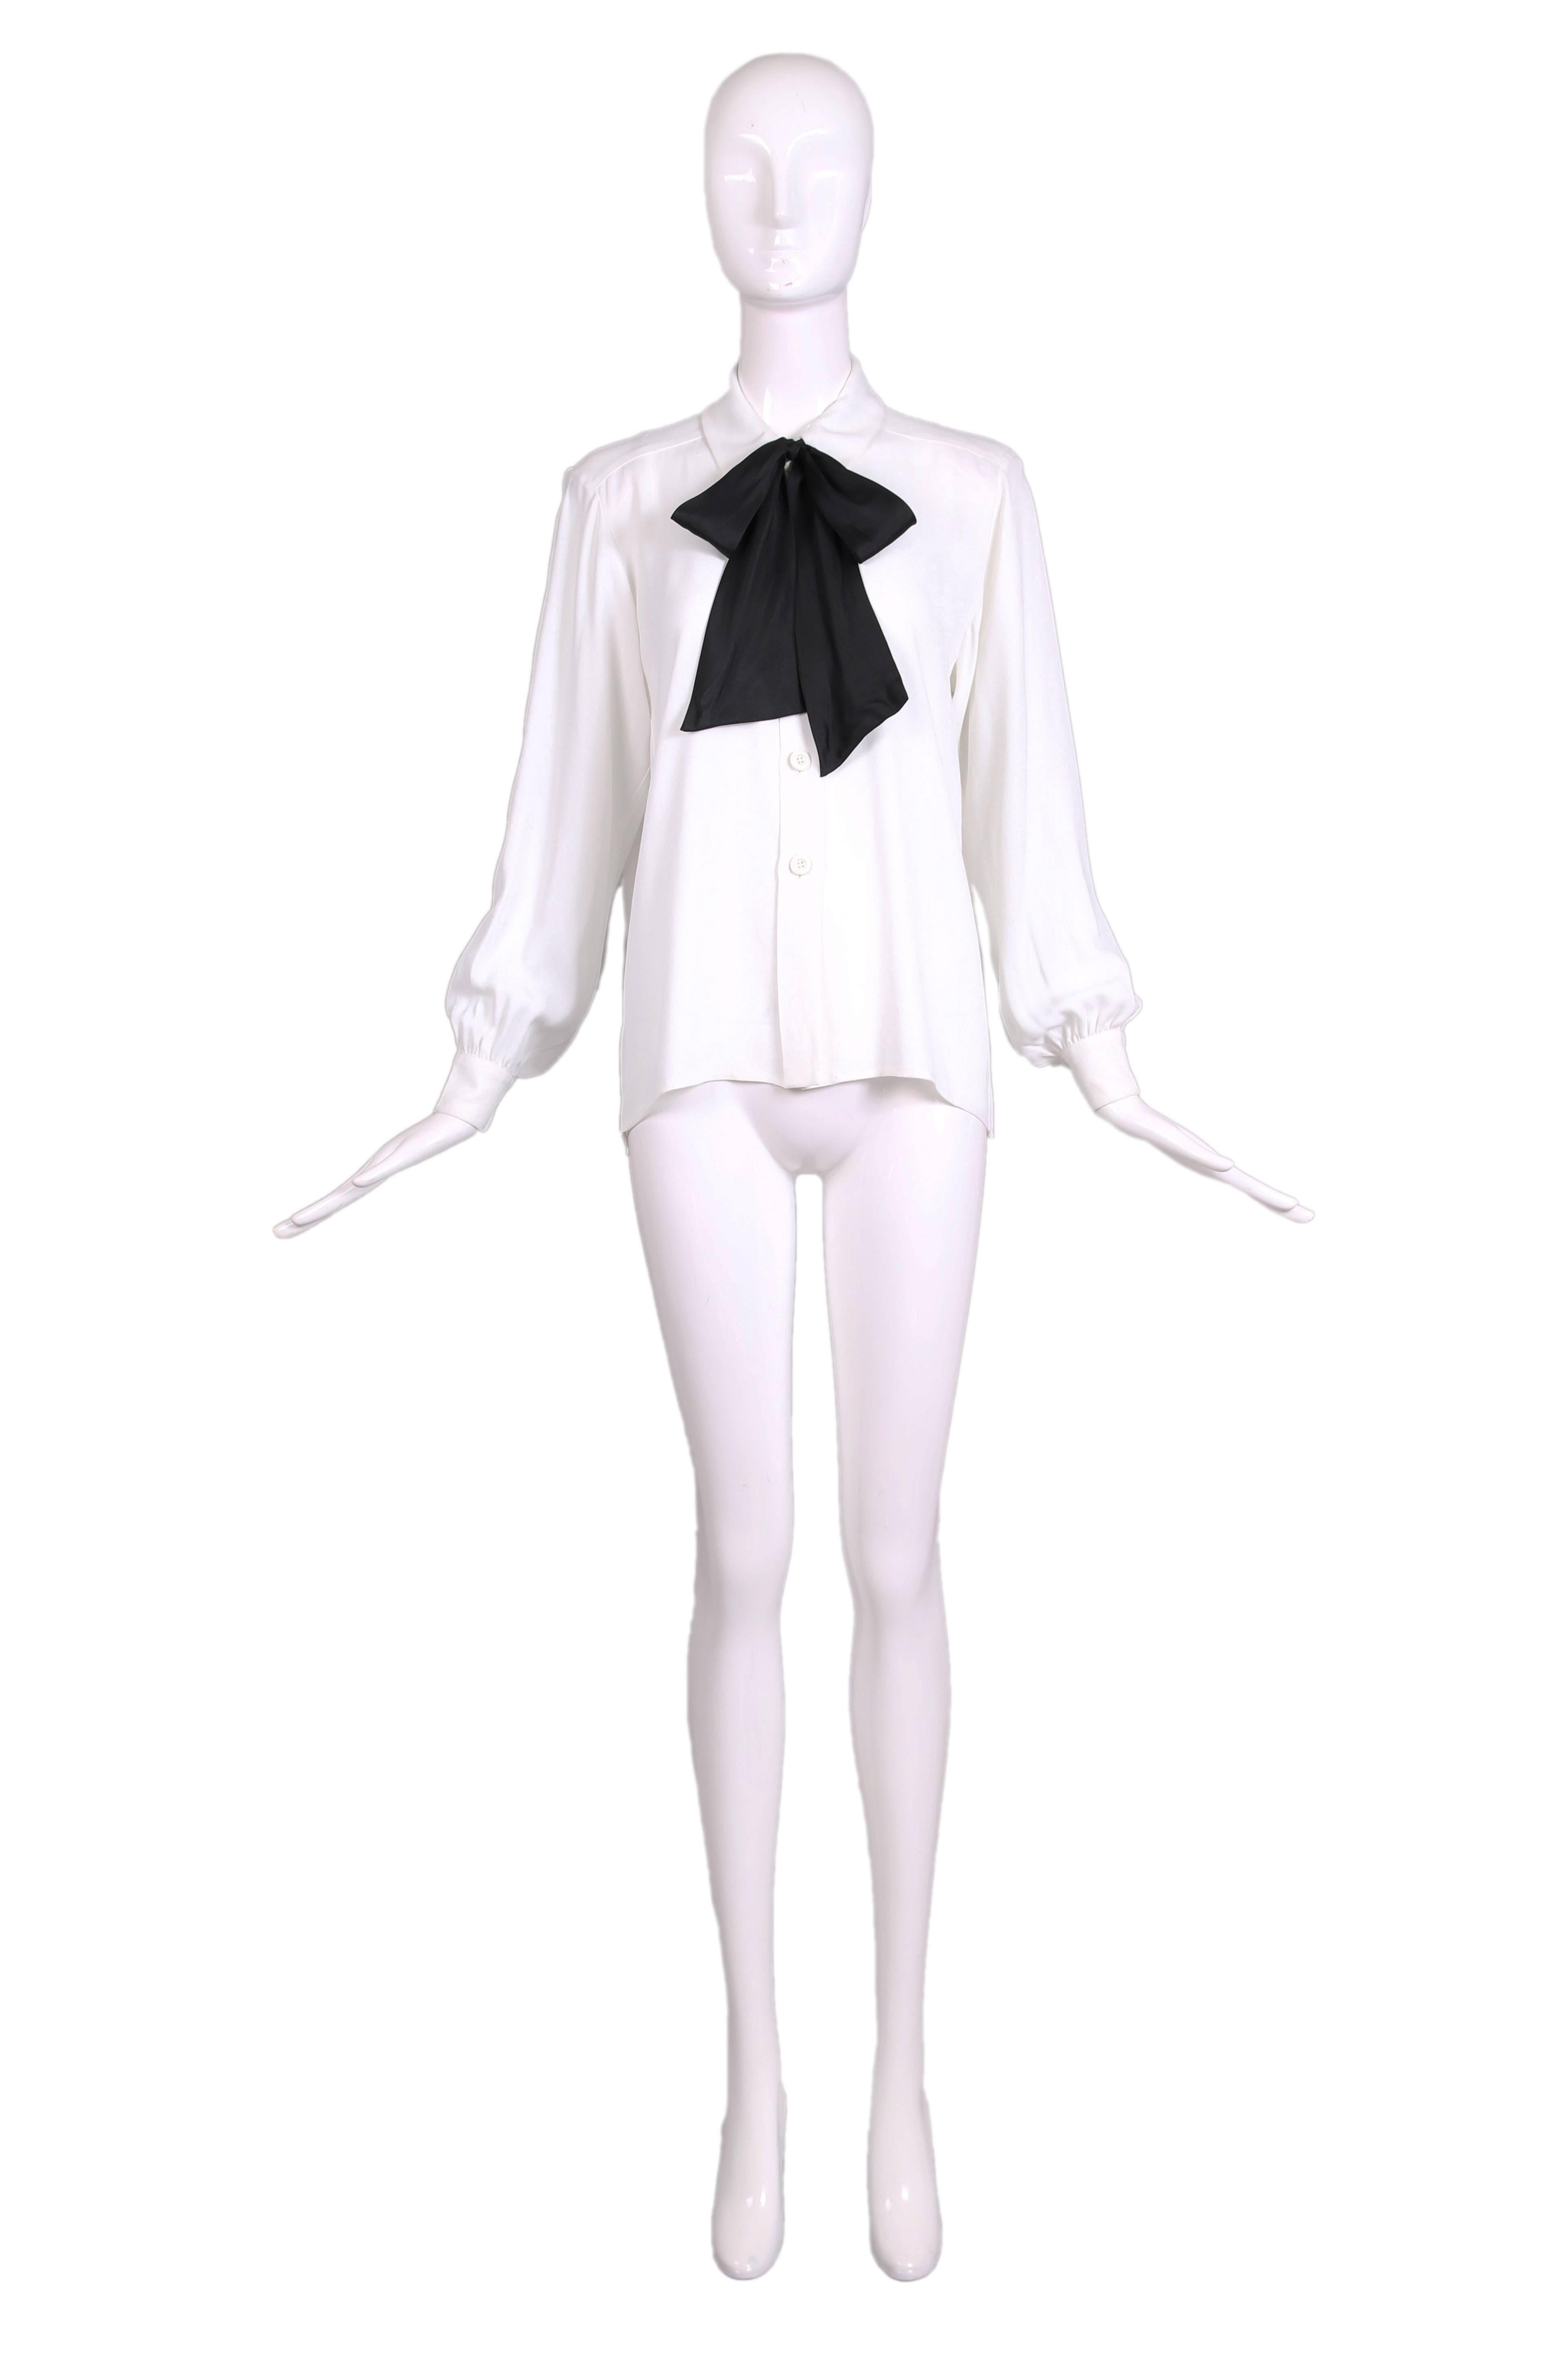 Vintage Yves Saint Laurent classic white blouse in soft crepe with black bow at the neck. The blouse has long sleeves with soft gathers around the 2